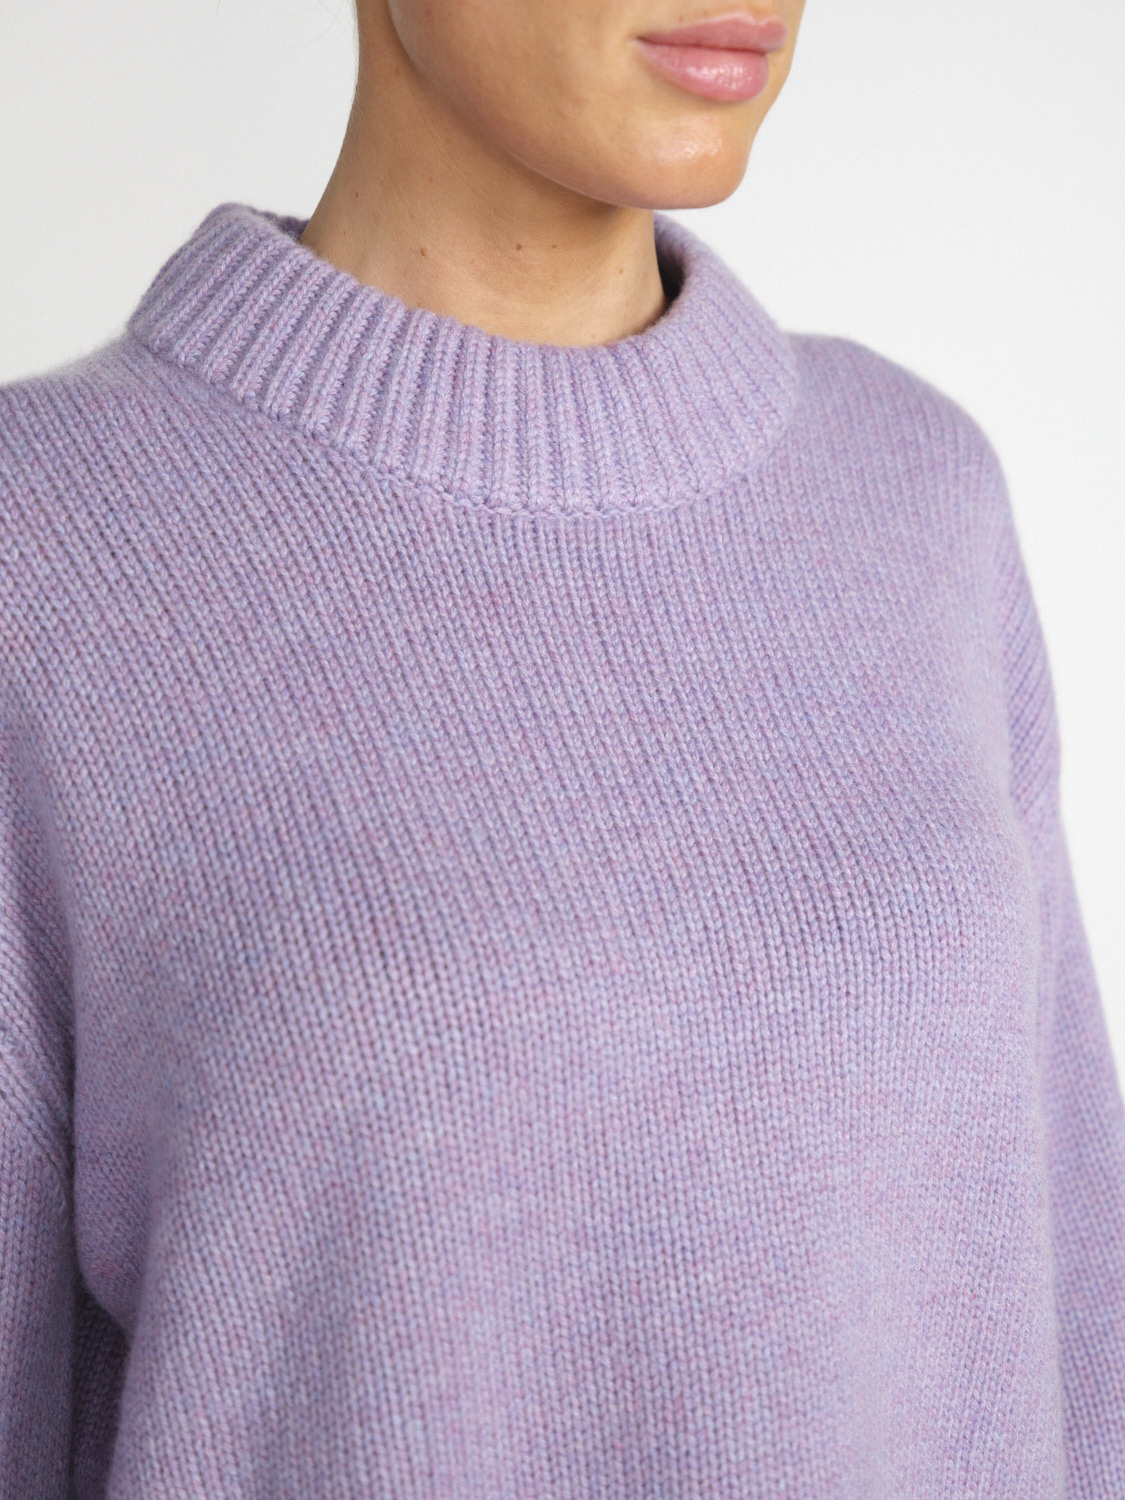 Lisa Yang Sony – Kurzer Cashmere Pullover   lila Taille unique